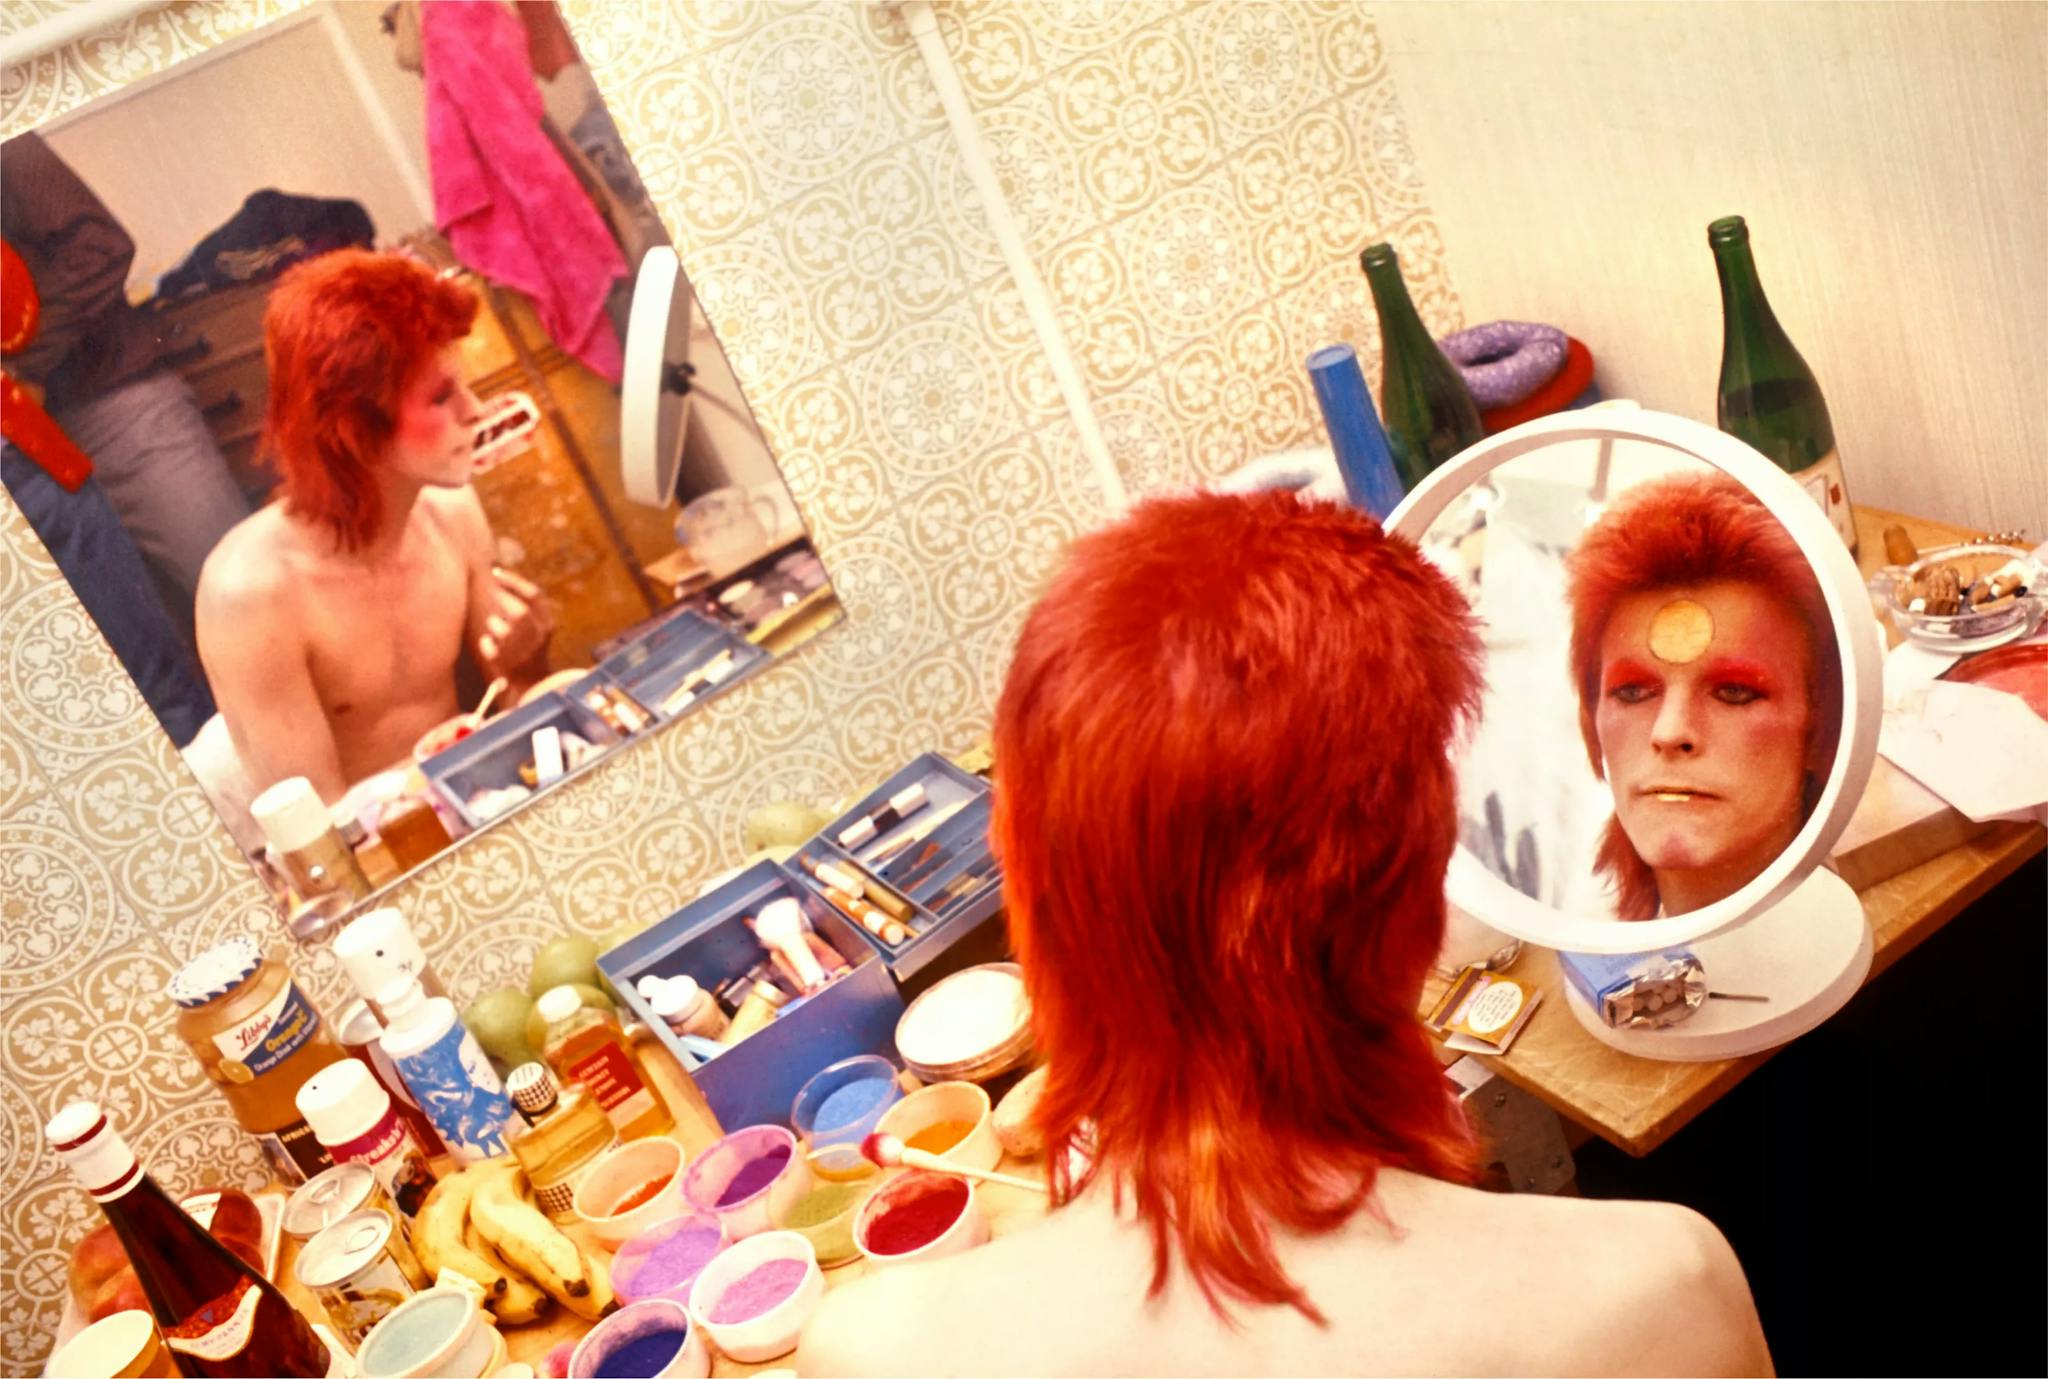 David bowie putting make-up in front of a mirror